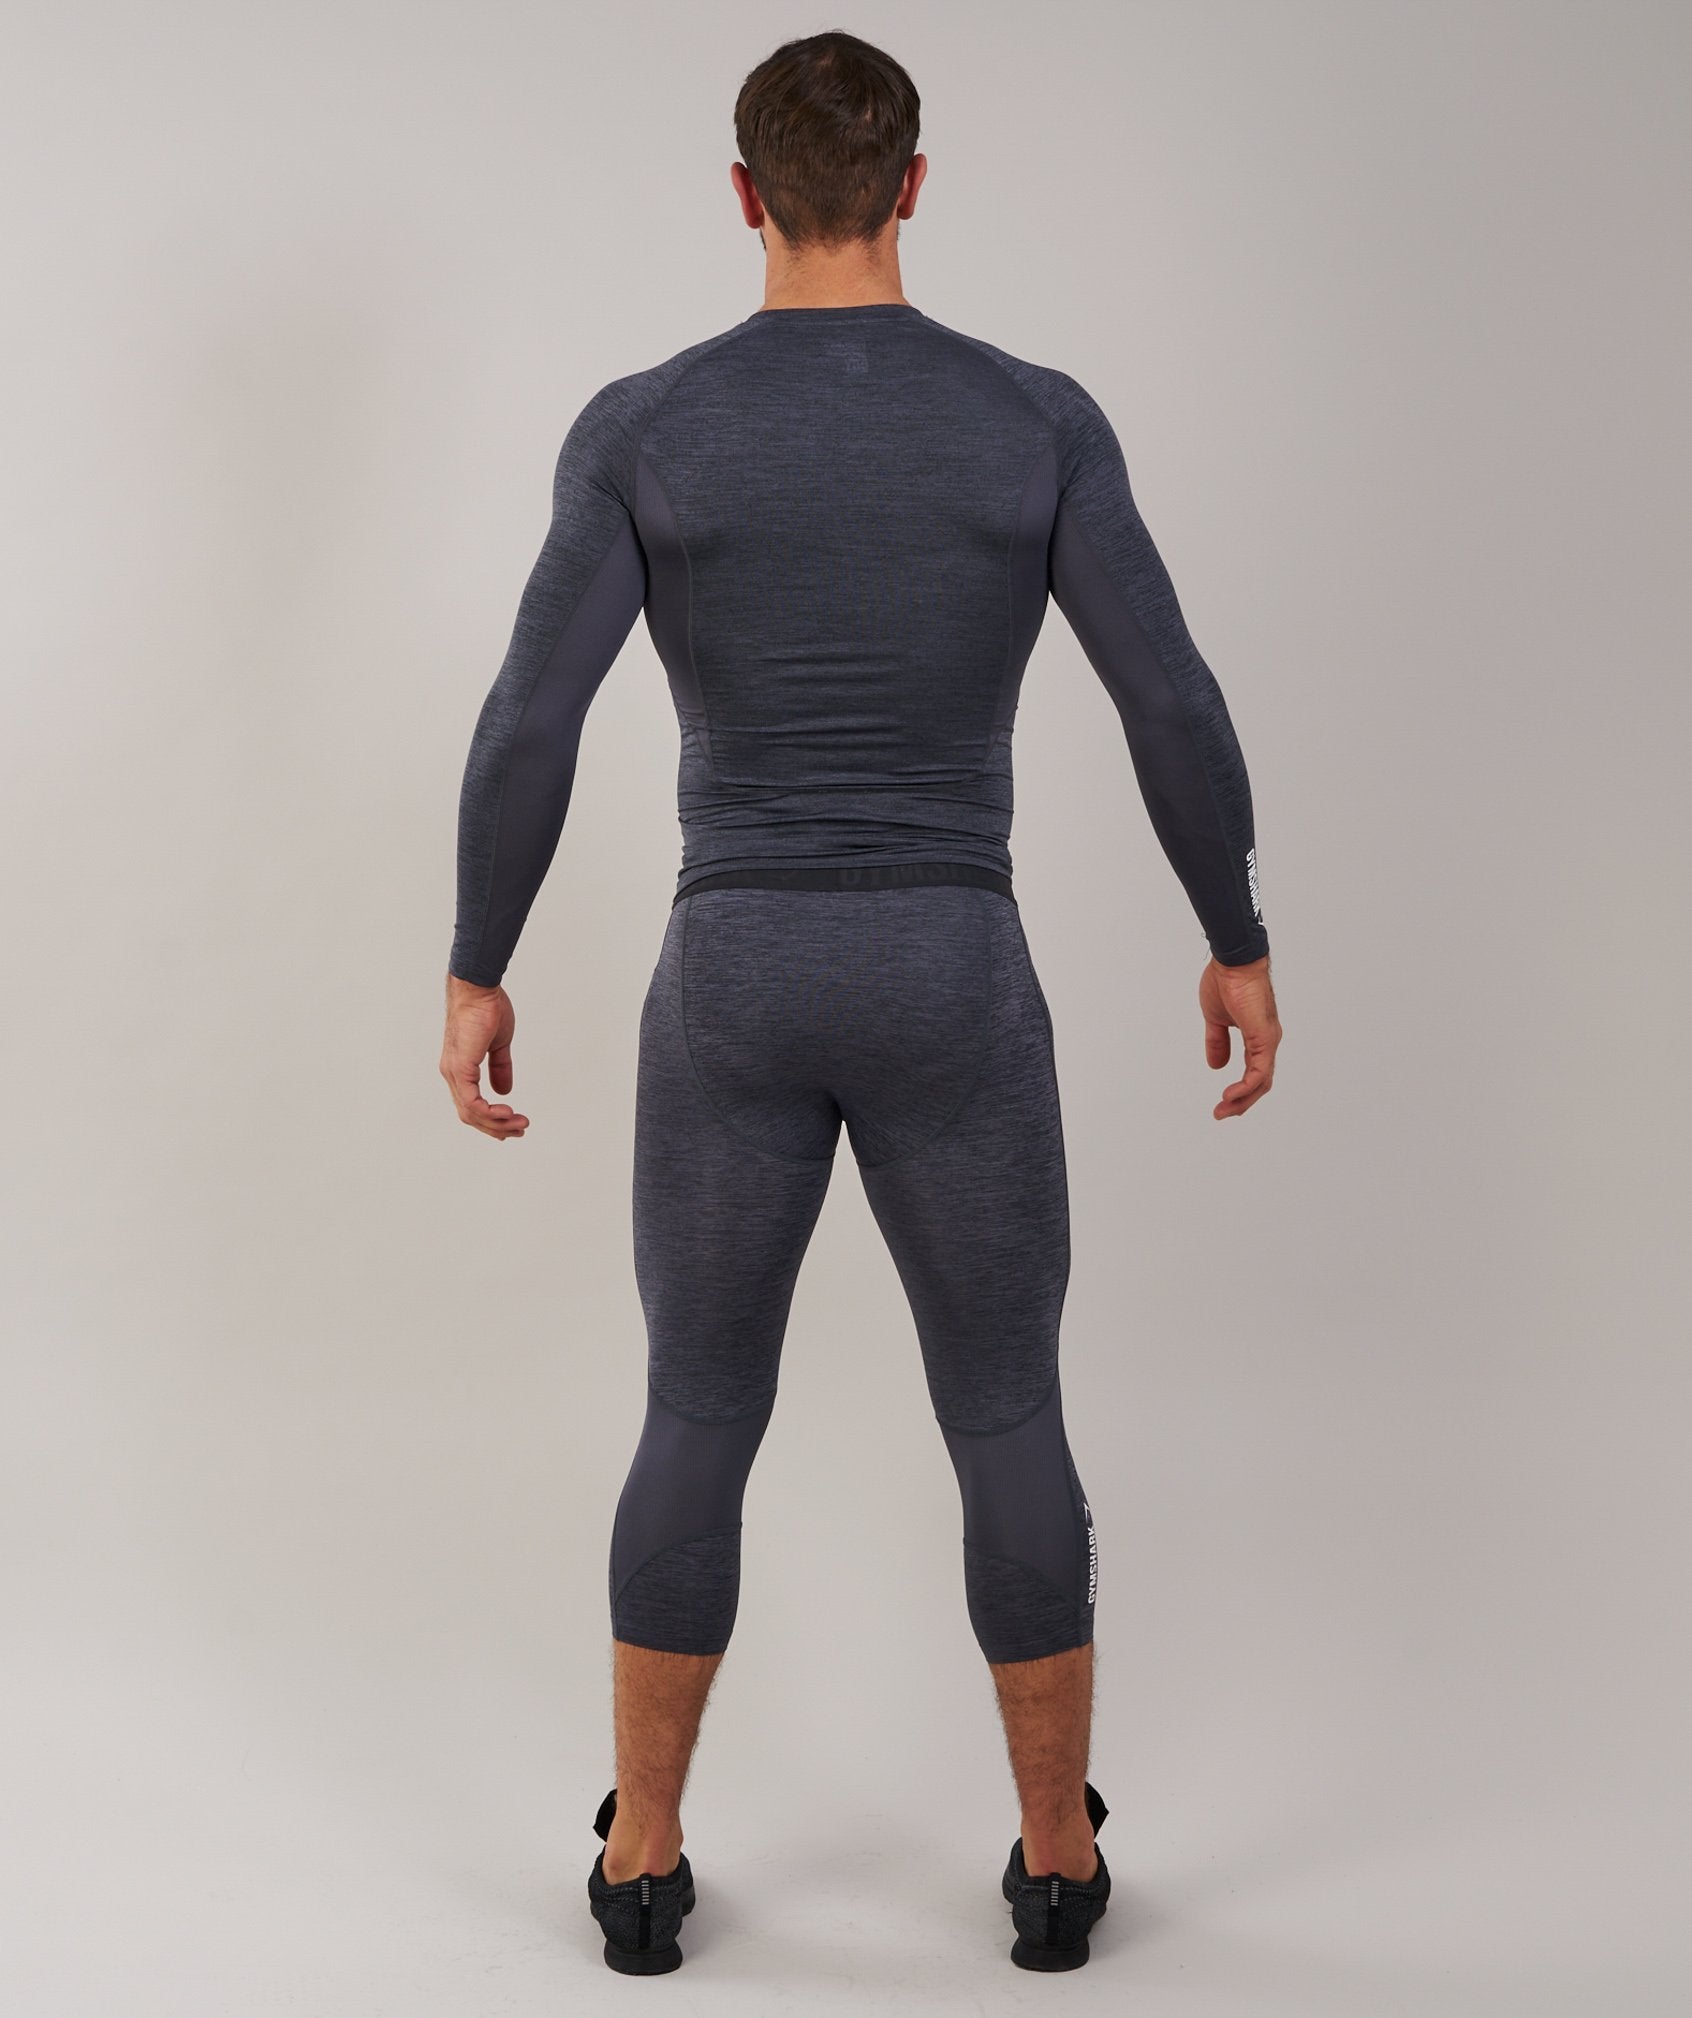 Element Baselayer 3/4 Legging in Charcoal Marl - view 2